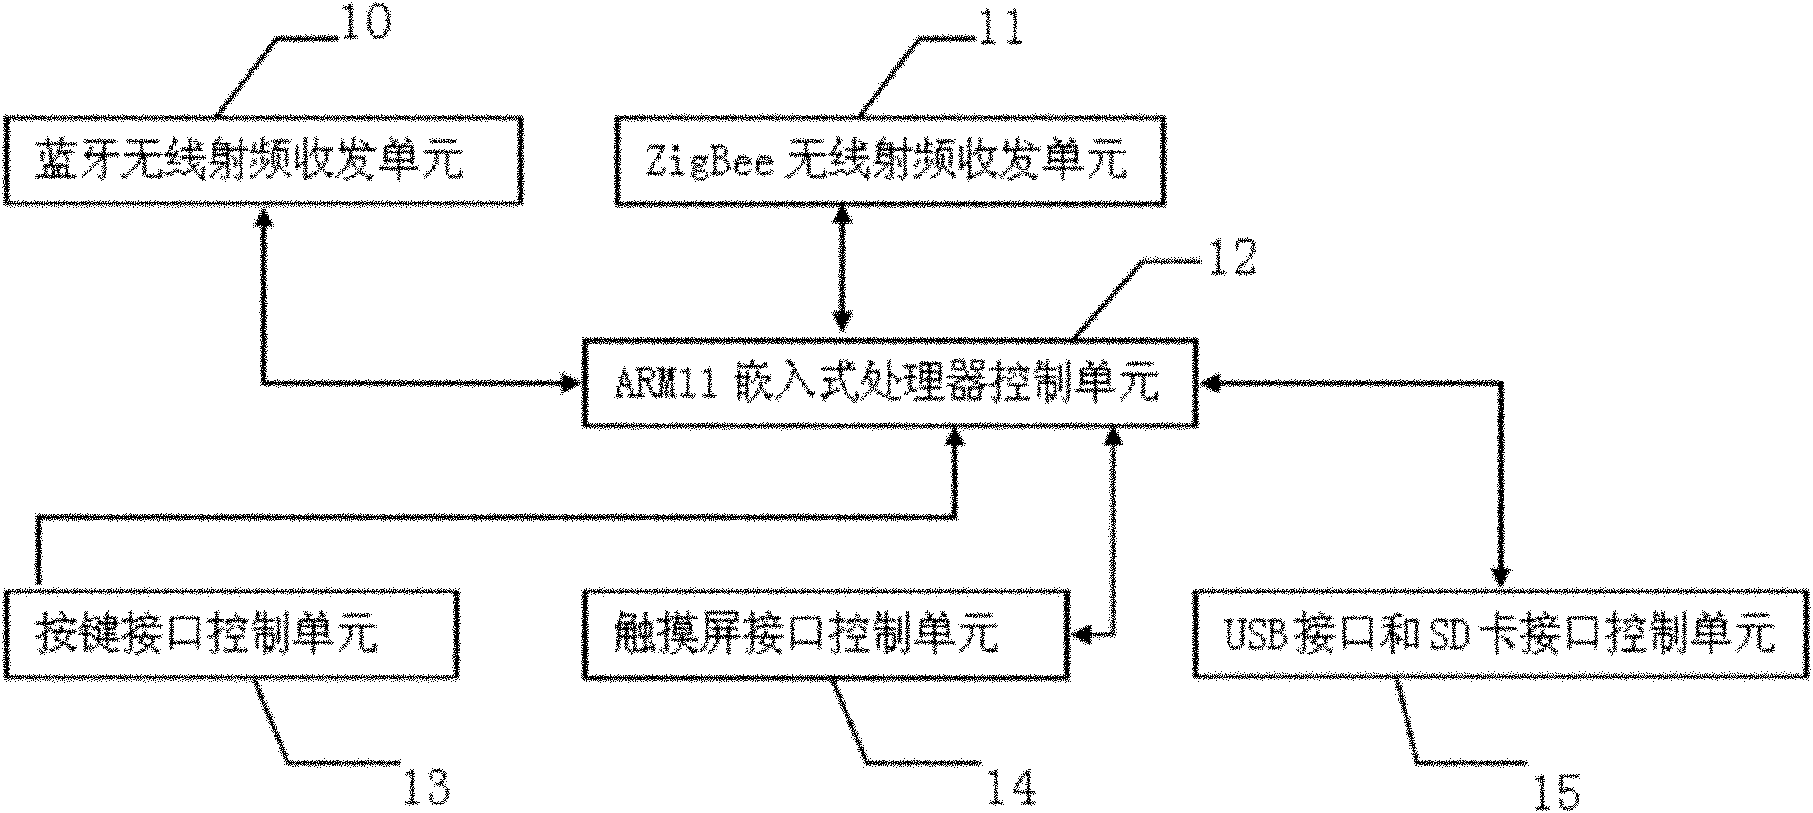 Wireless sensor network gateway equipment based on moveable interconnection of bluetooth